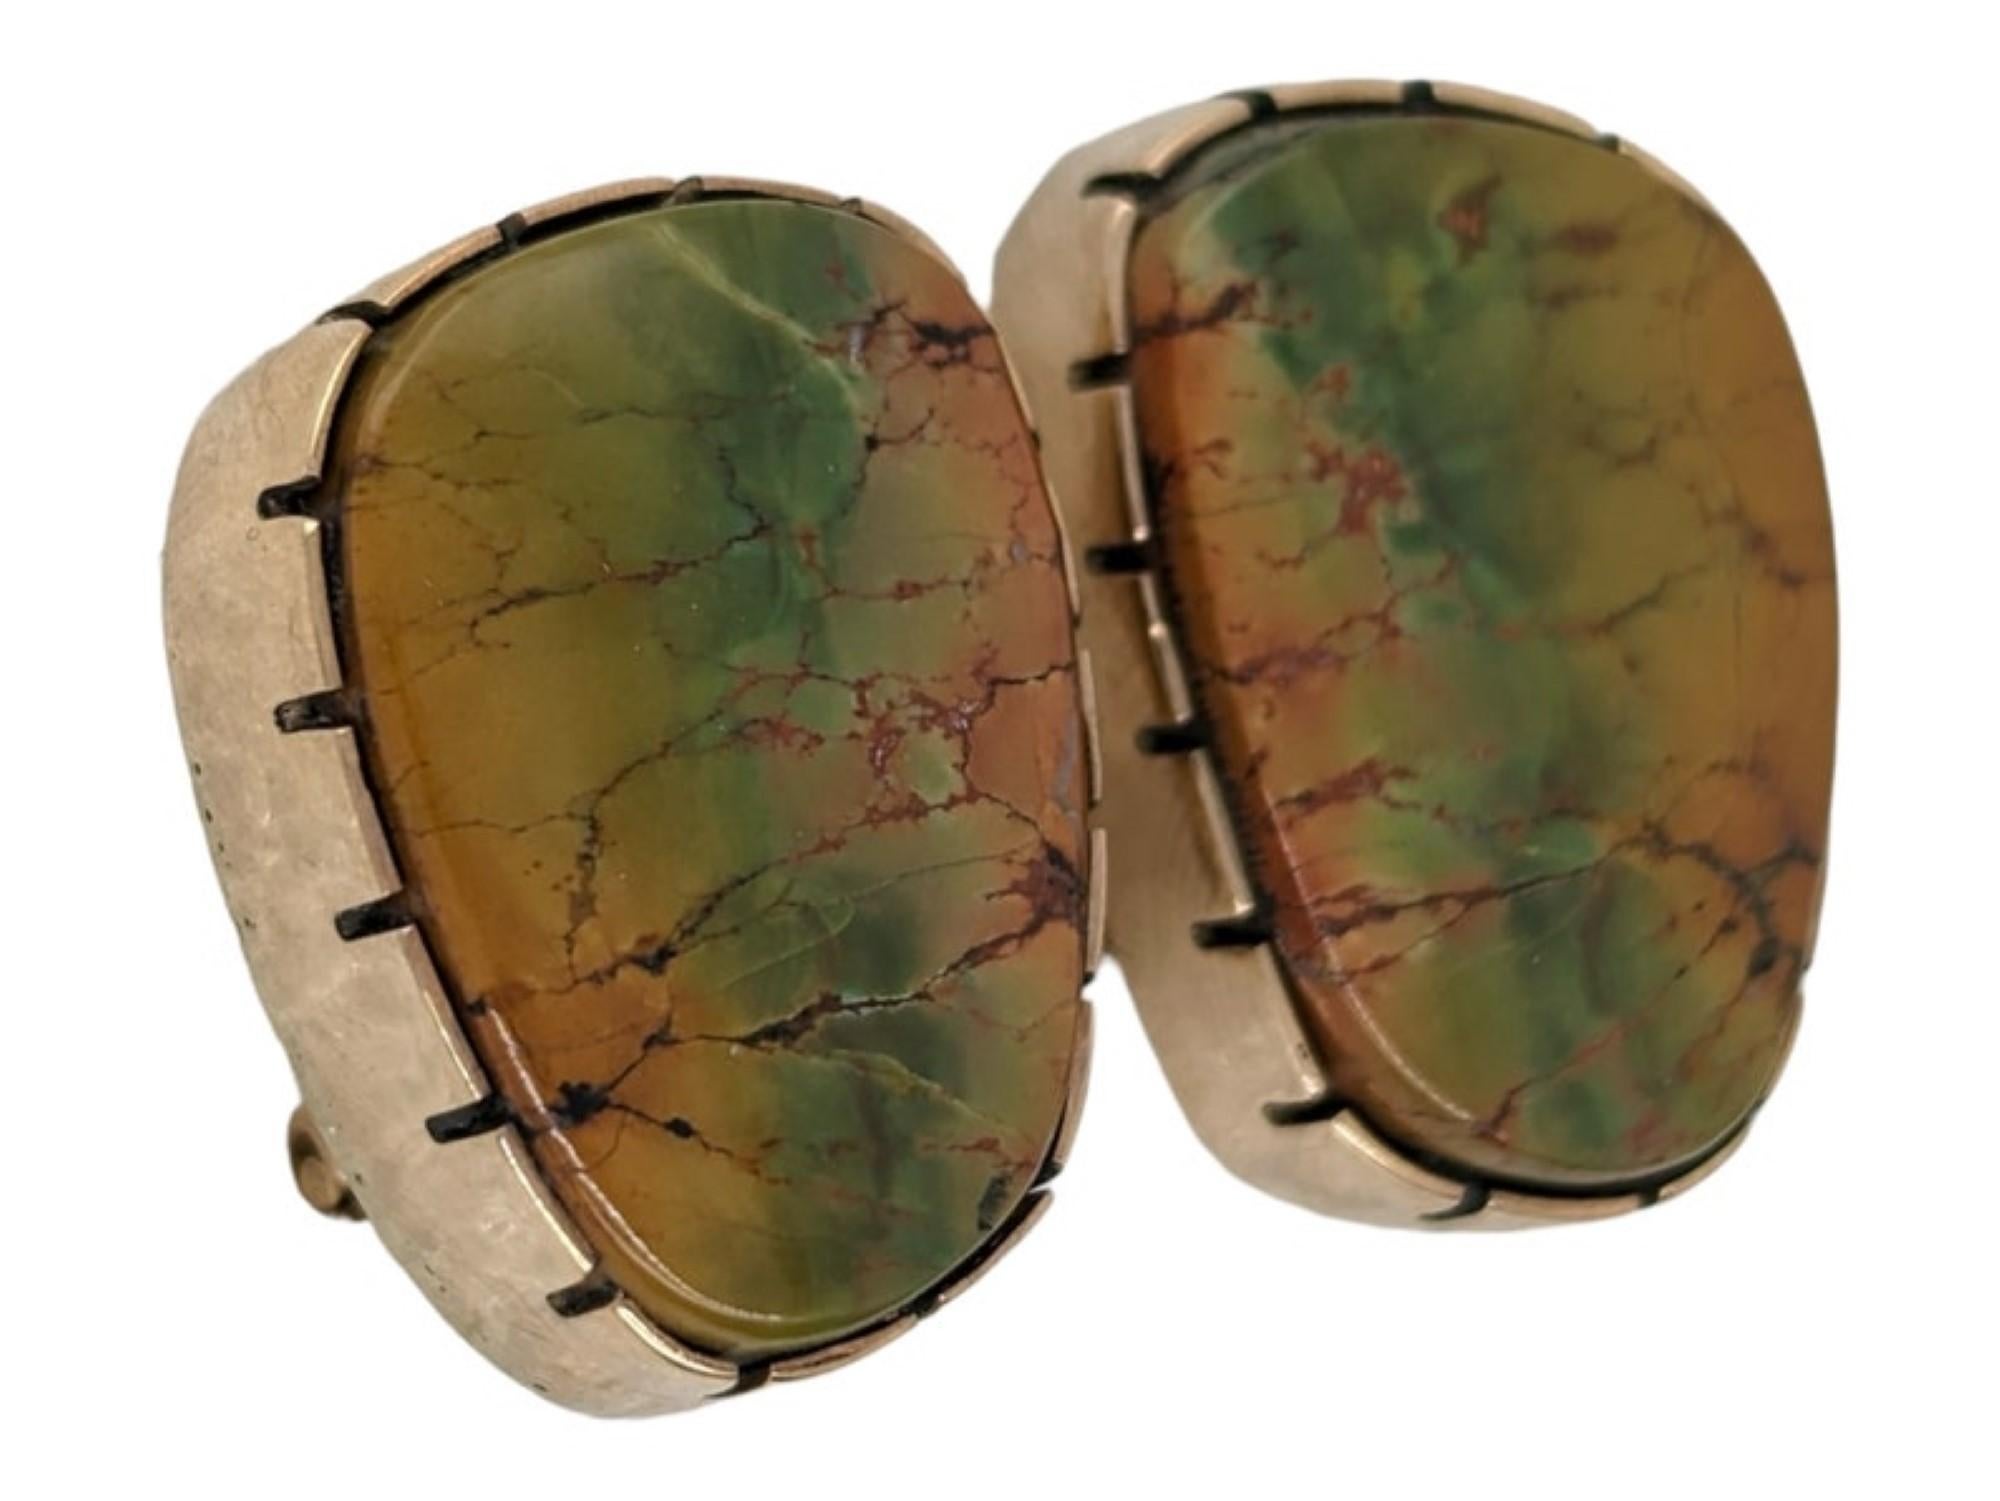 Discover our handcrafted earrings by silversmith Rob Sherman. These earrings feature cowboy and bohochic aesthetics. Perfect for those who appreciate a blend of traditional and modern styles! Each pair is uniquely mismatched, featuring green